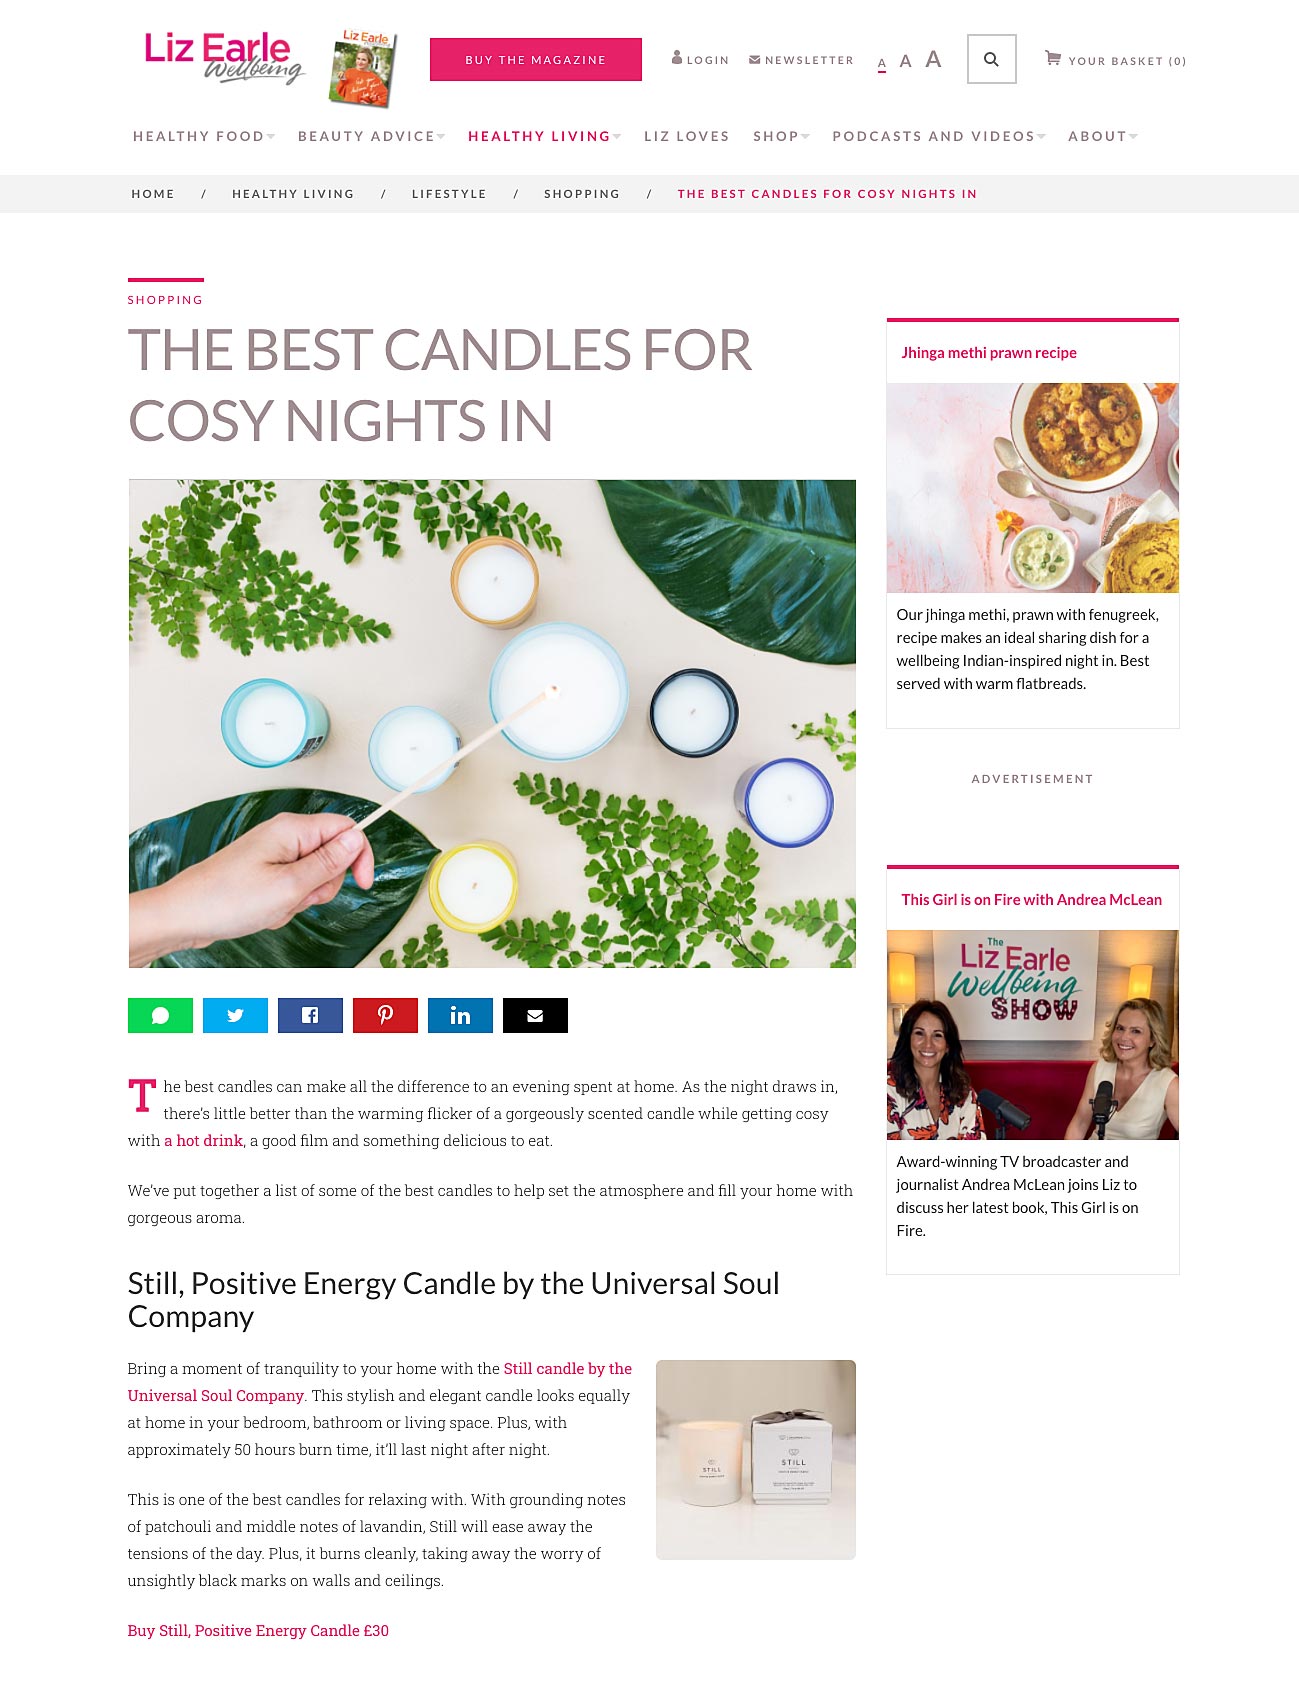 STILL POSITIVE ENERGY CANDLE IS VOTED THE BEST CANDLE FOR A COSY NIGHT IN BY LIZ EARLE WELLBEING ARTICLE